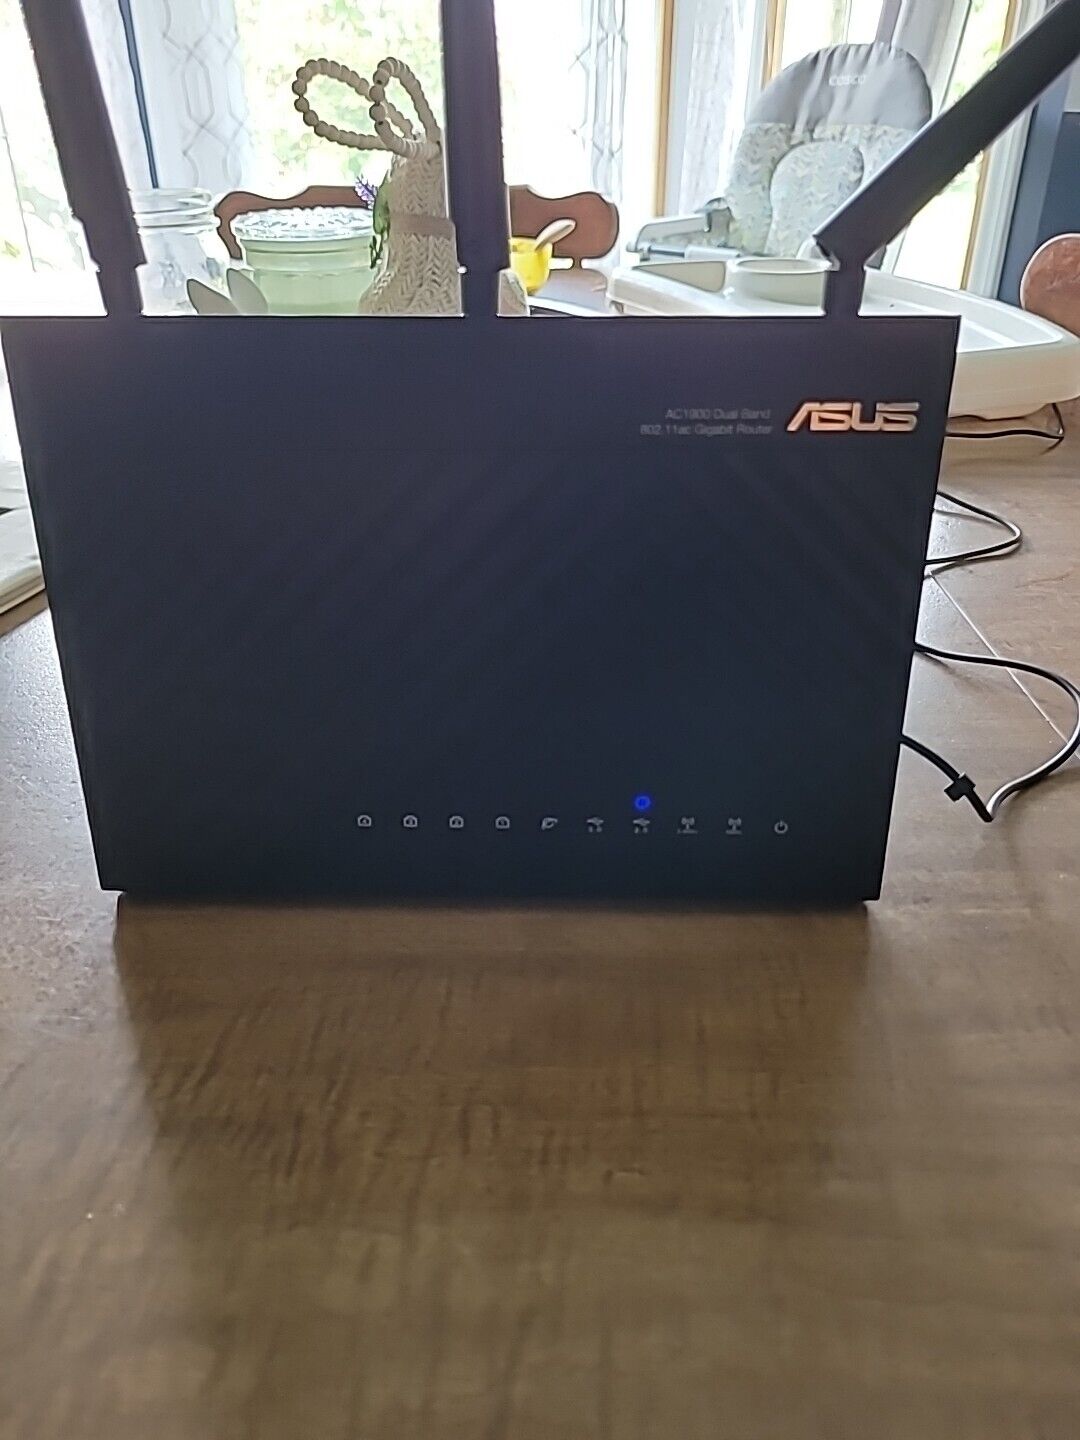 ASUS AC1900 Dual Band Wireless Router Model RT-AC68U NO CHARGER